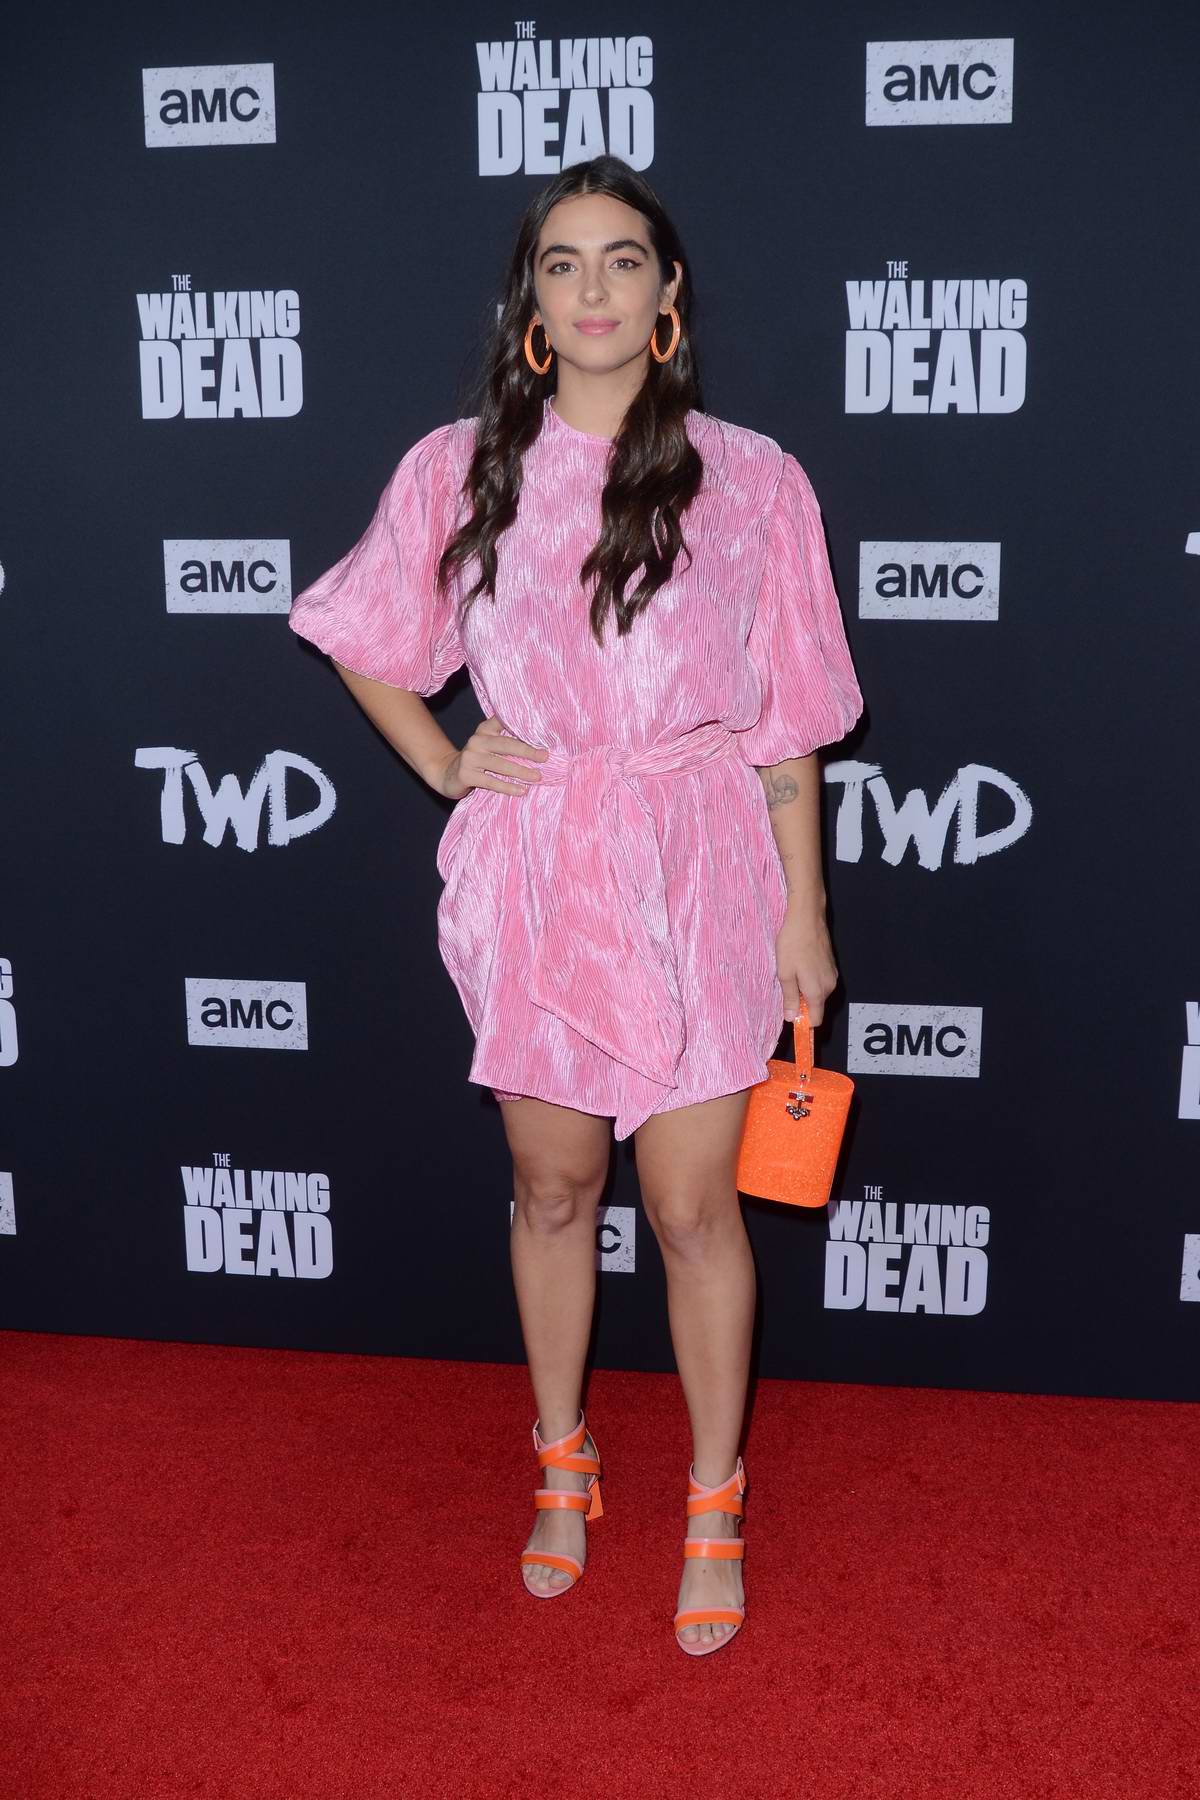 alanna masterson attends 'the walking dead' premiere and party at